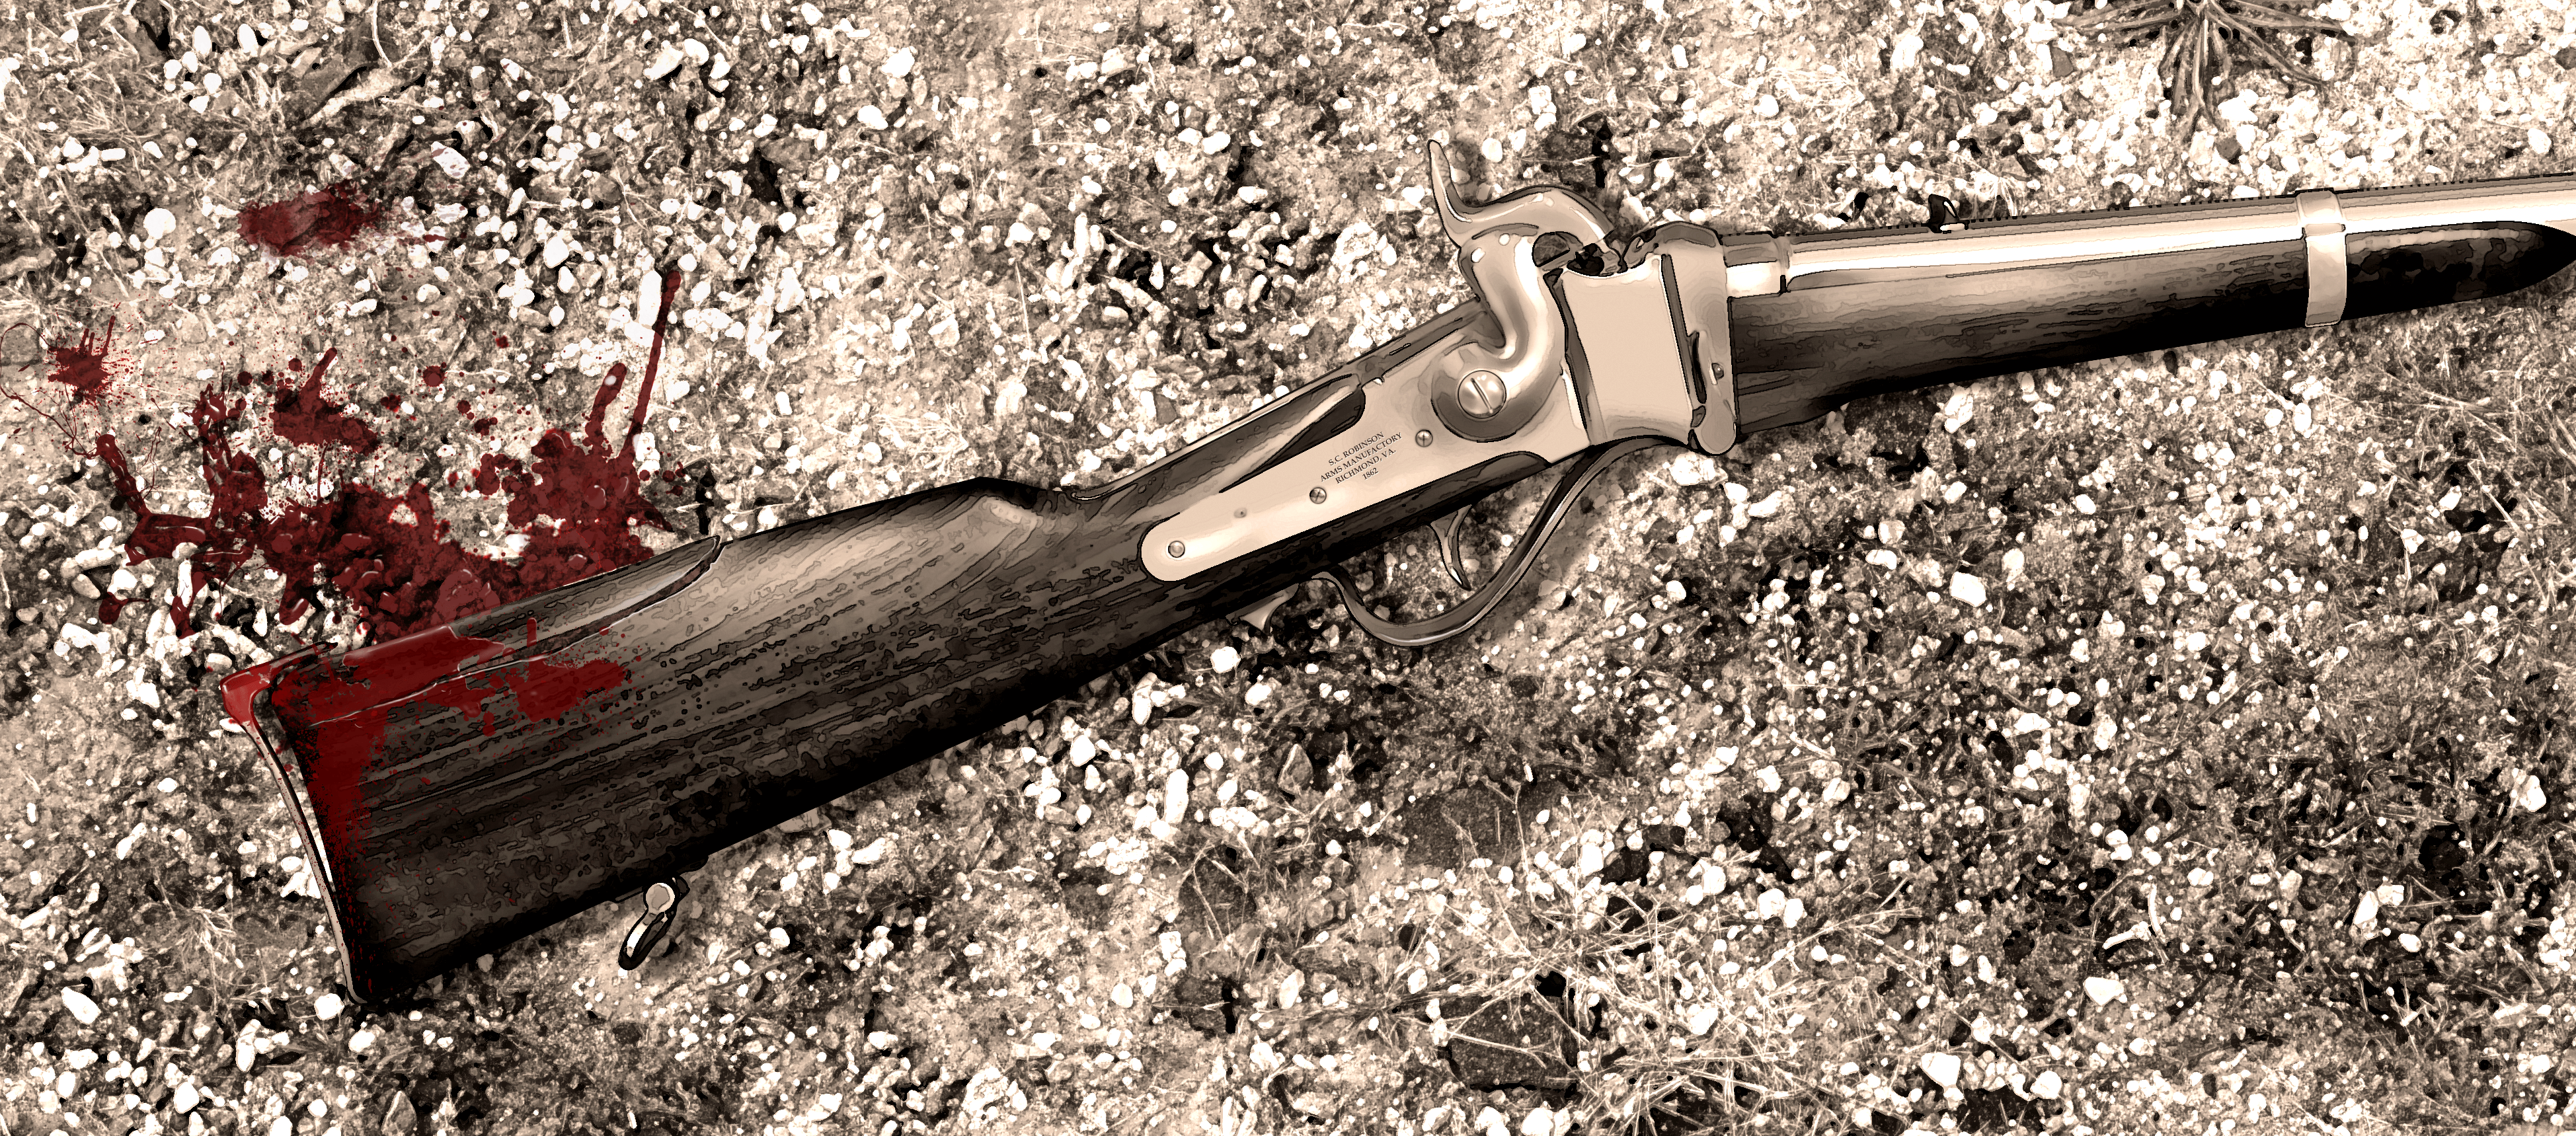 A rifle witha cracked and bloody stock.